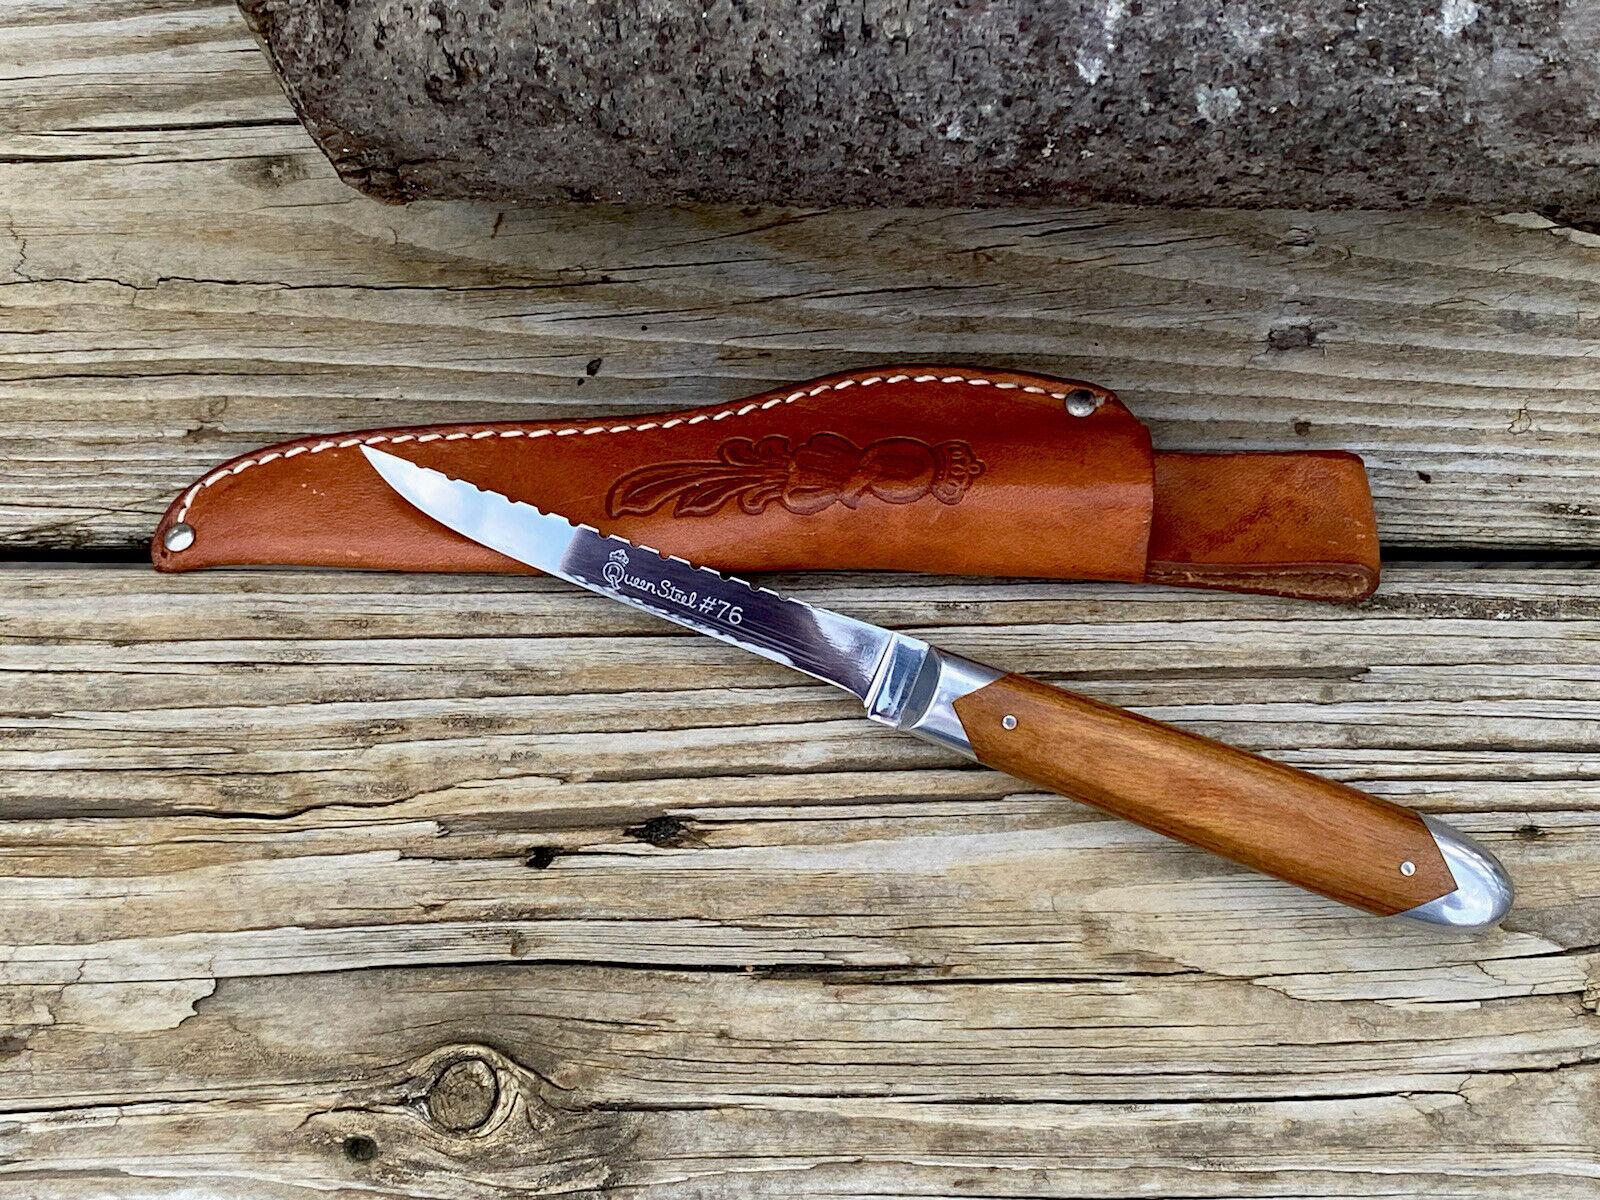 https://simhq.com/store/img-large/g/EWQAAOSwFtdg1qk~/s-l1600/VINTAGE-FIXED-BLADE-KNIFE-QUEEN-STEEL-76-FISHING-K.jpg